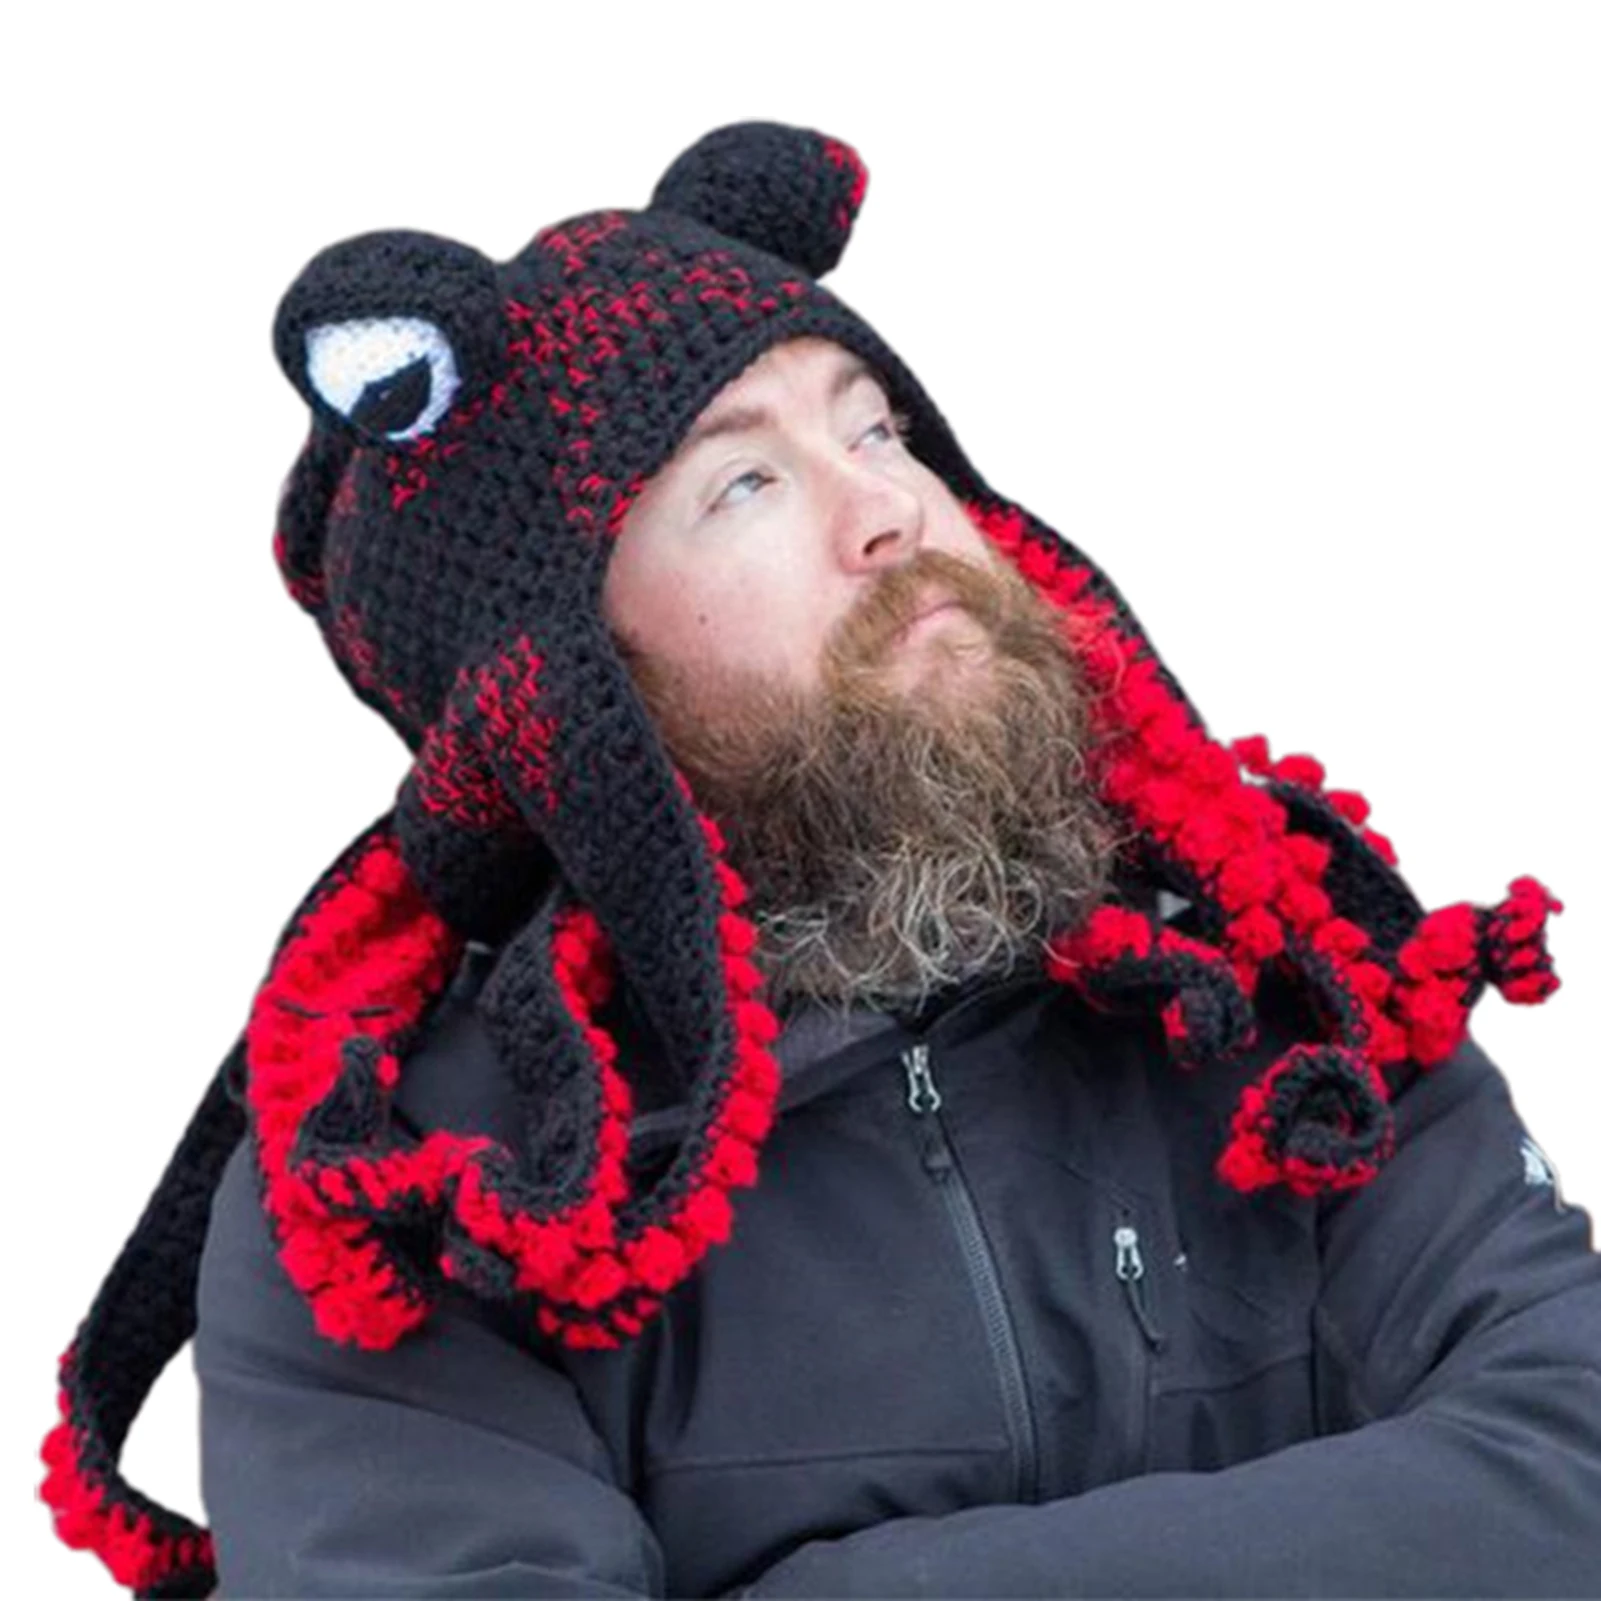 Octopus Beard Hand Weave Knit Wool Hats Unique Soft Crochet Beanies Birthday Christmas Gft for Halloween Costume Cosplay images - 6